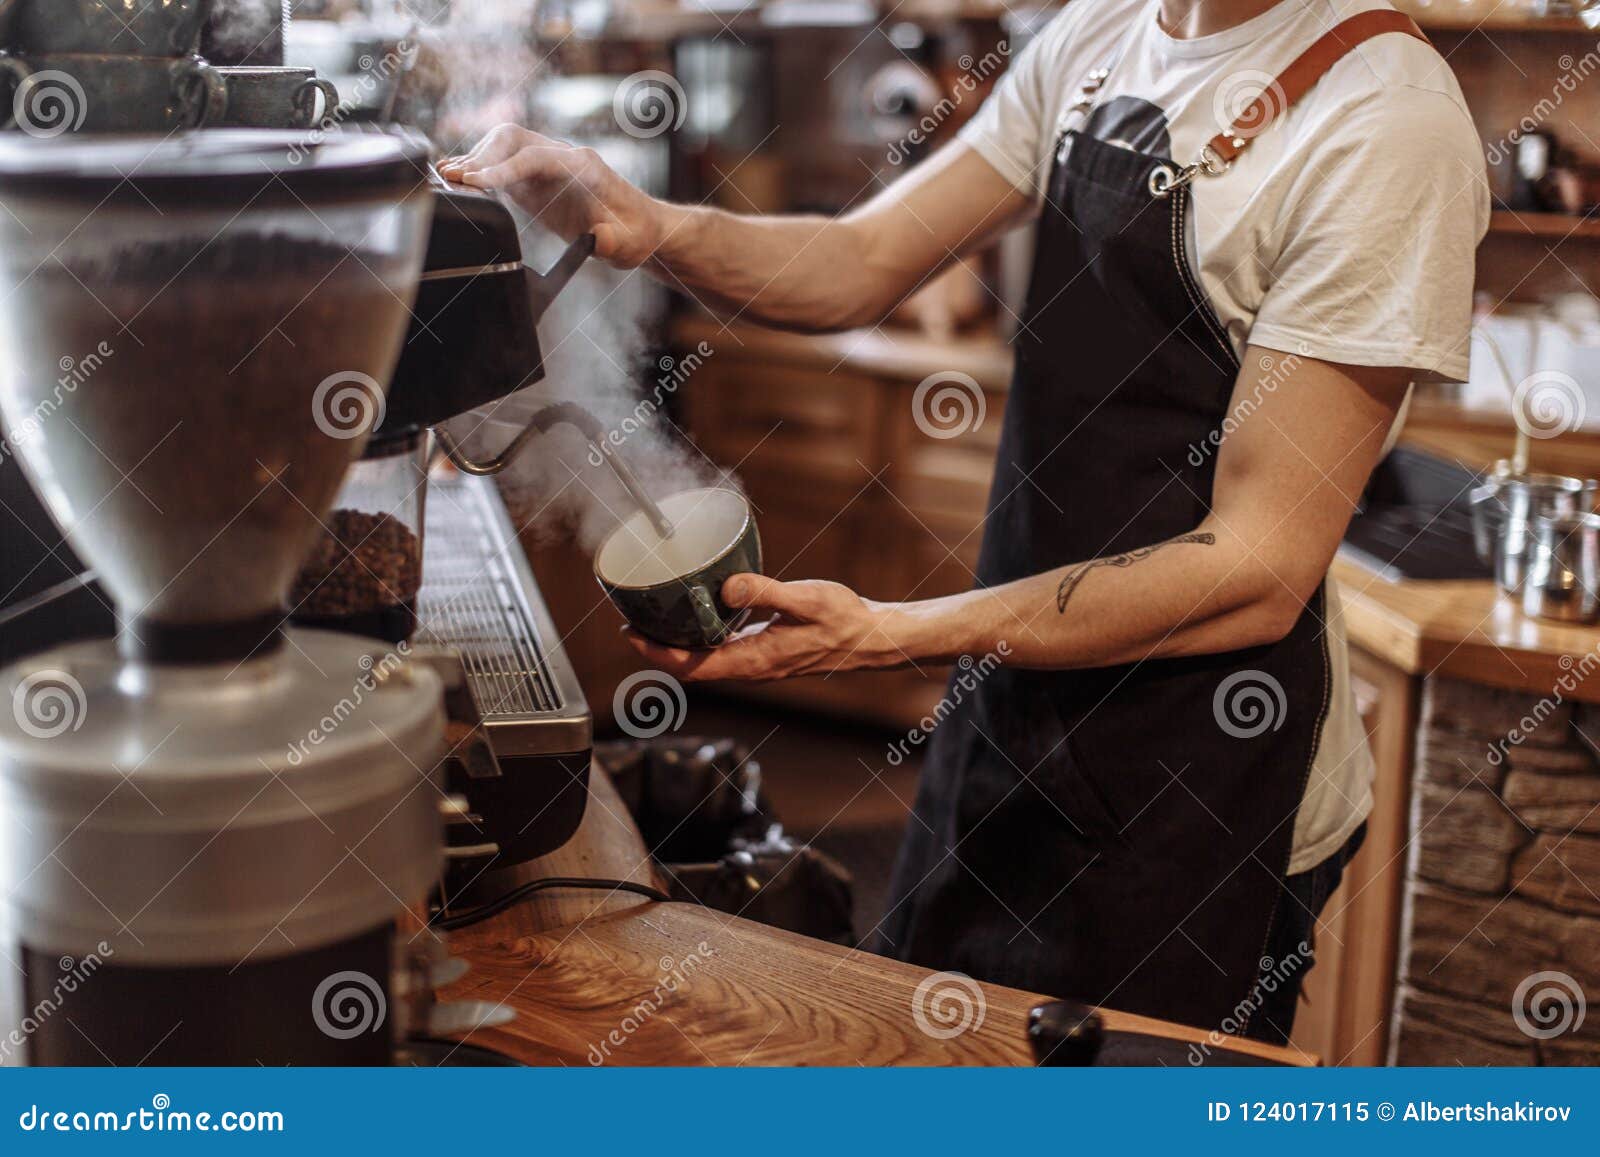 https://thumbs.dreamstime.com/z/guy-pouring-hot-water-cup-coffee-bar-guy-pouring-hot-water-cup-coffee-bar-close-up-cropped-124017115.jpg